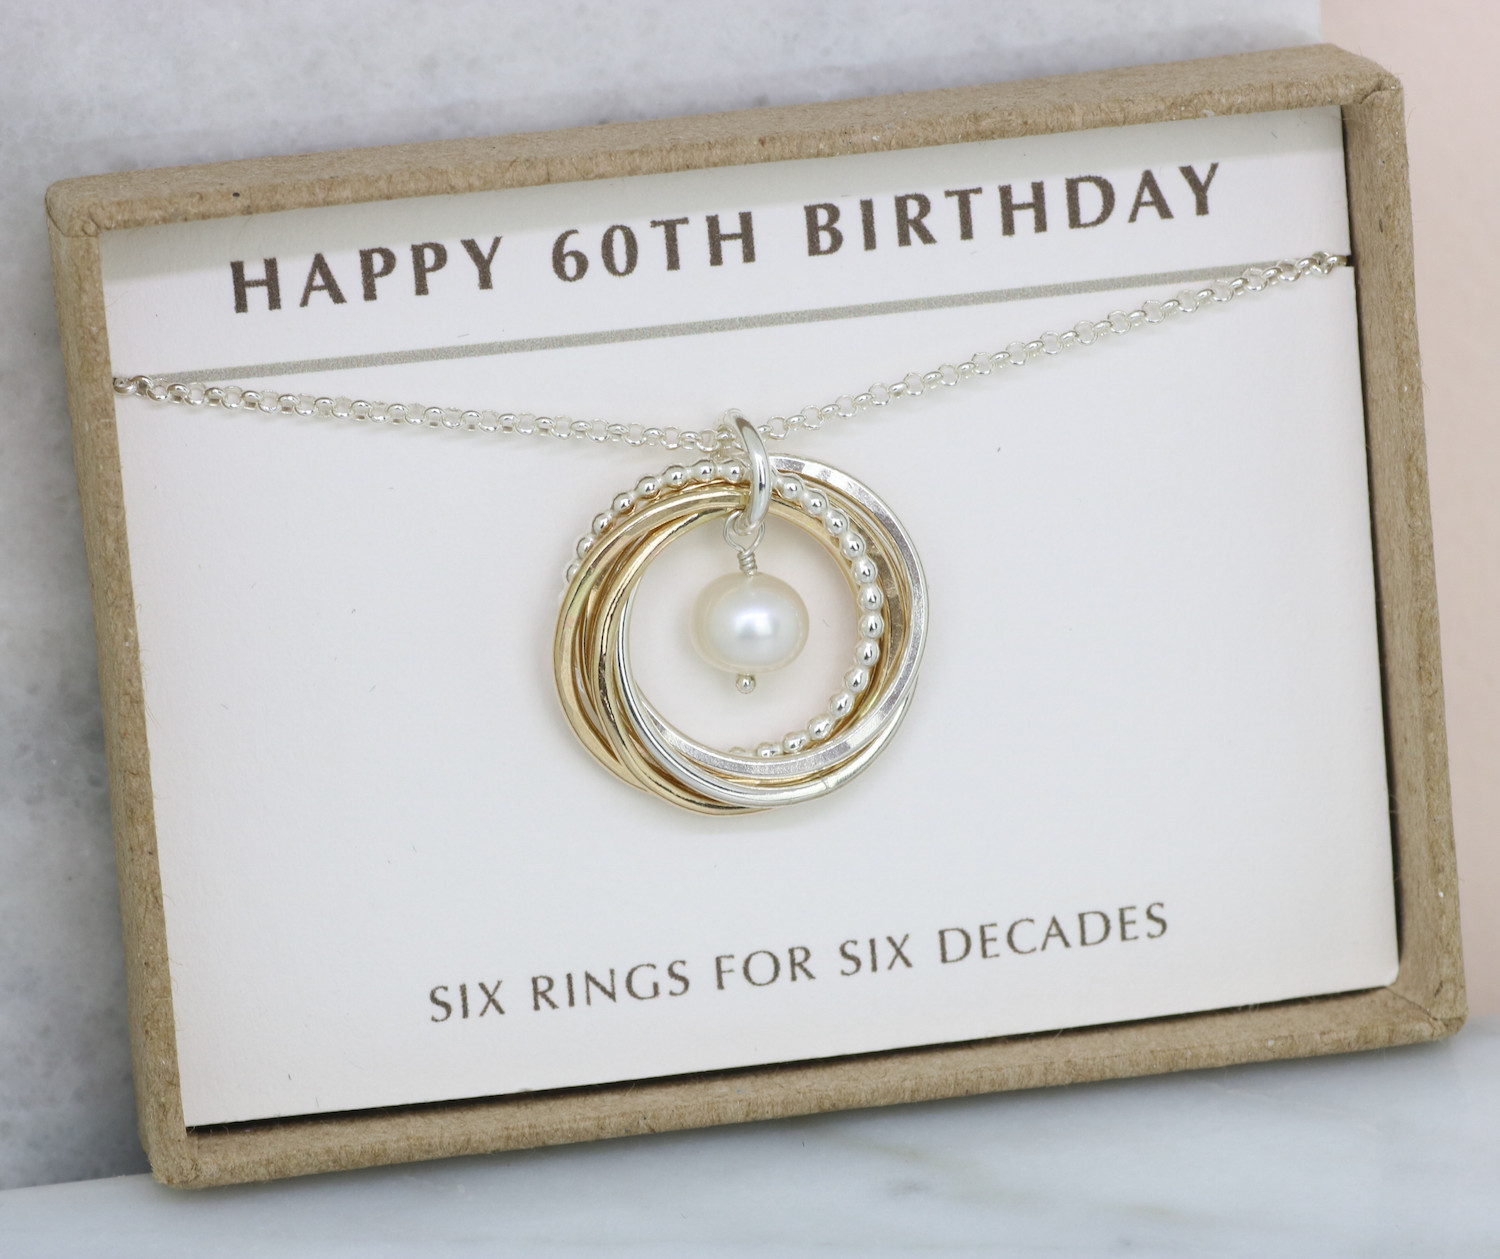 60Th Birthday Gift Ideas For Her
 60th birthday t idea June birthstone Gifts